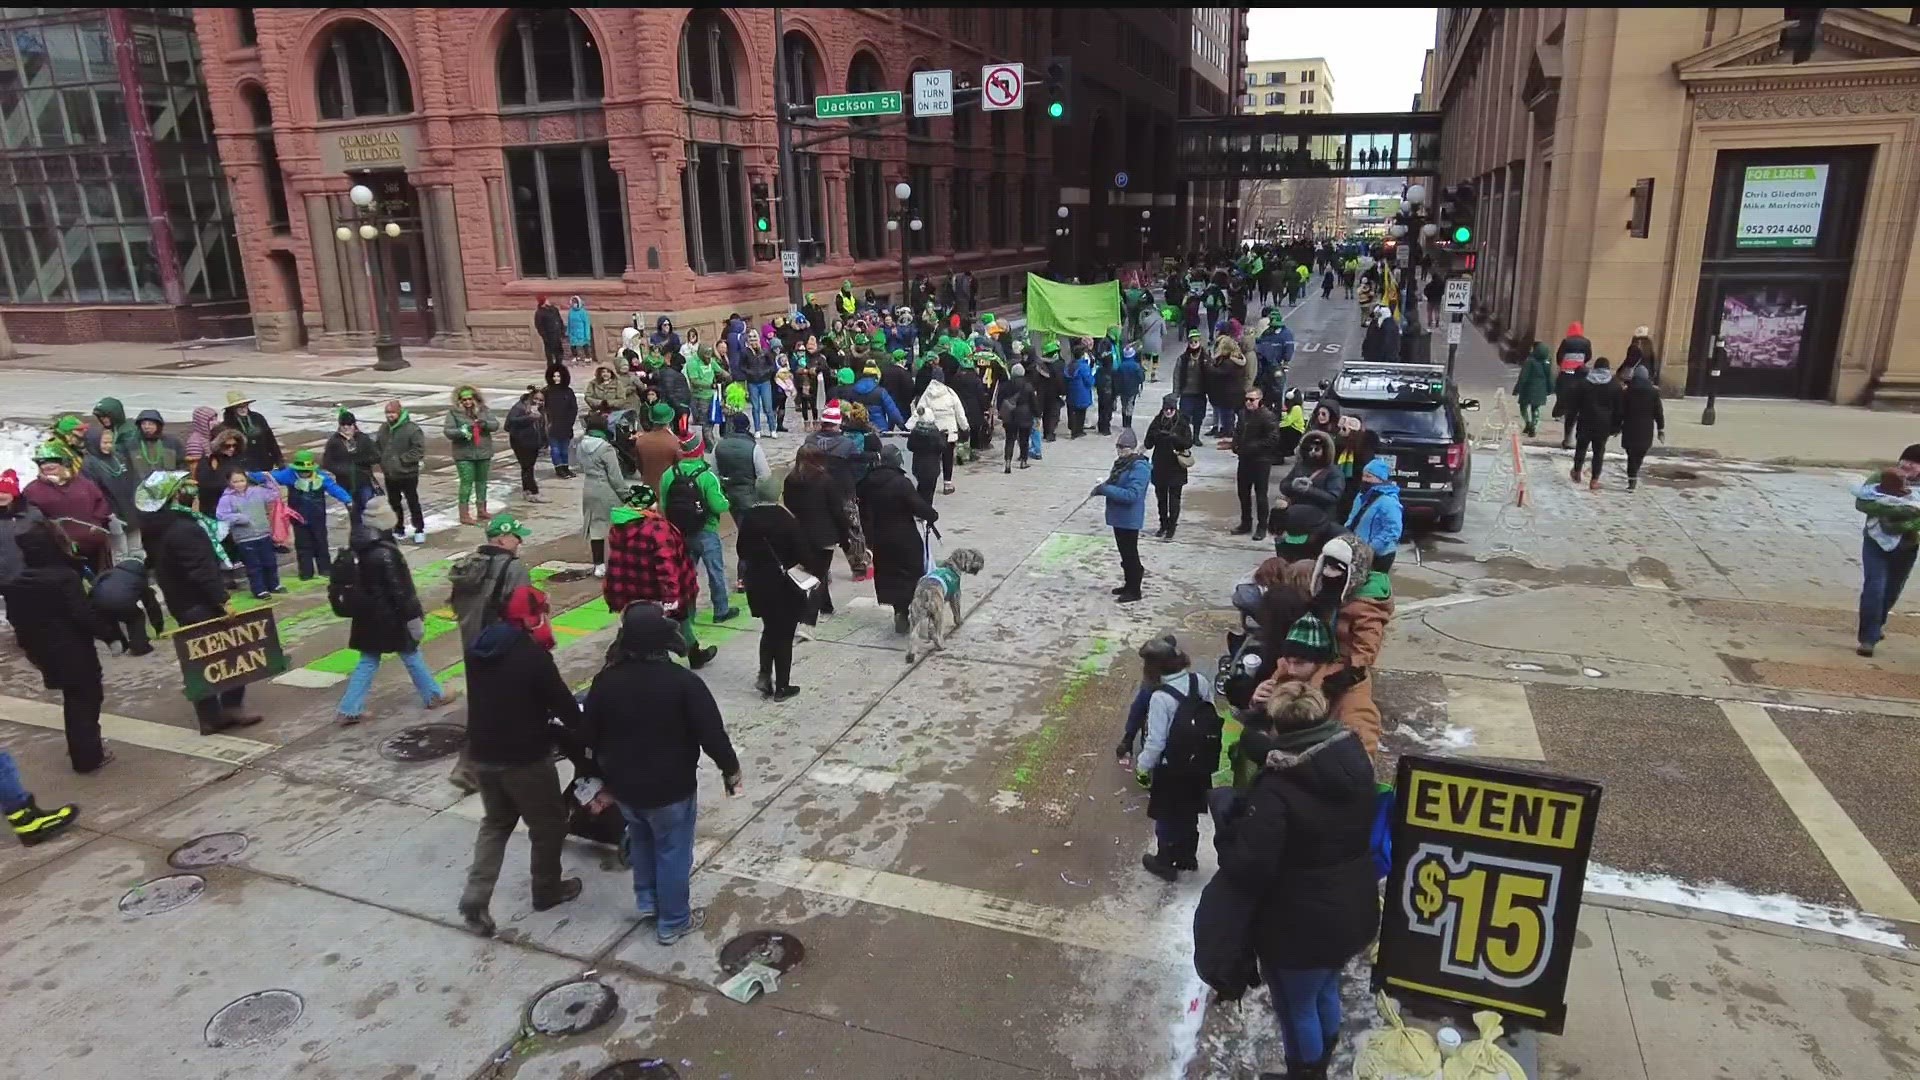 Despite the temperature, people still turned out to celebrate the coldest St. Patrick's Day in 30 years.